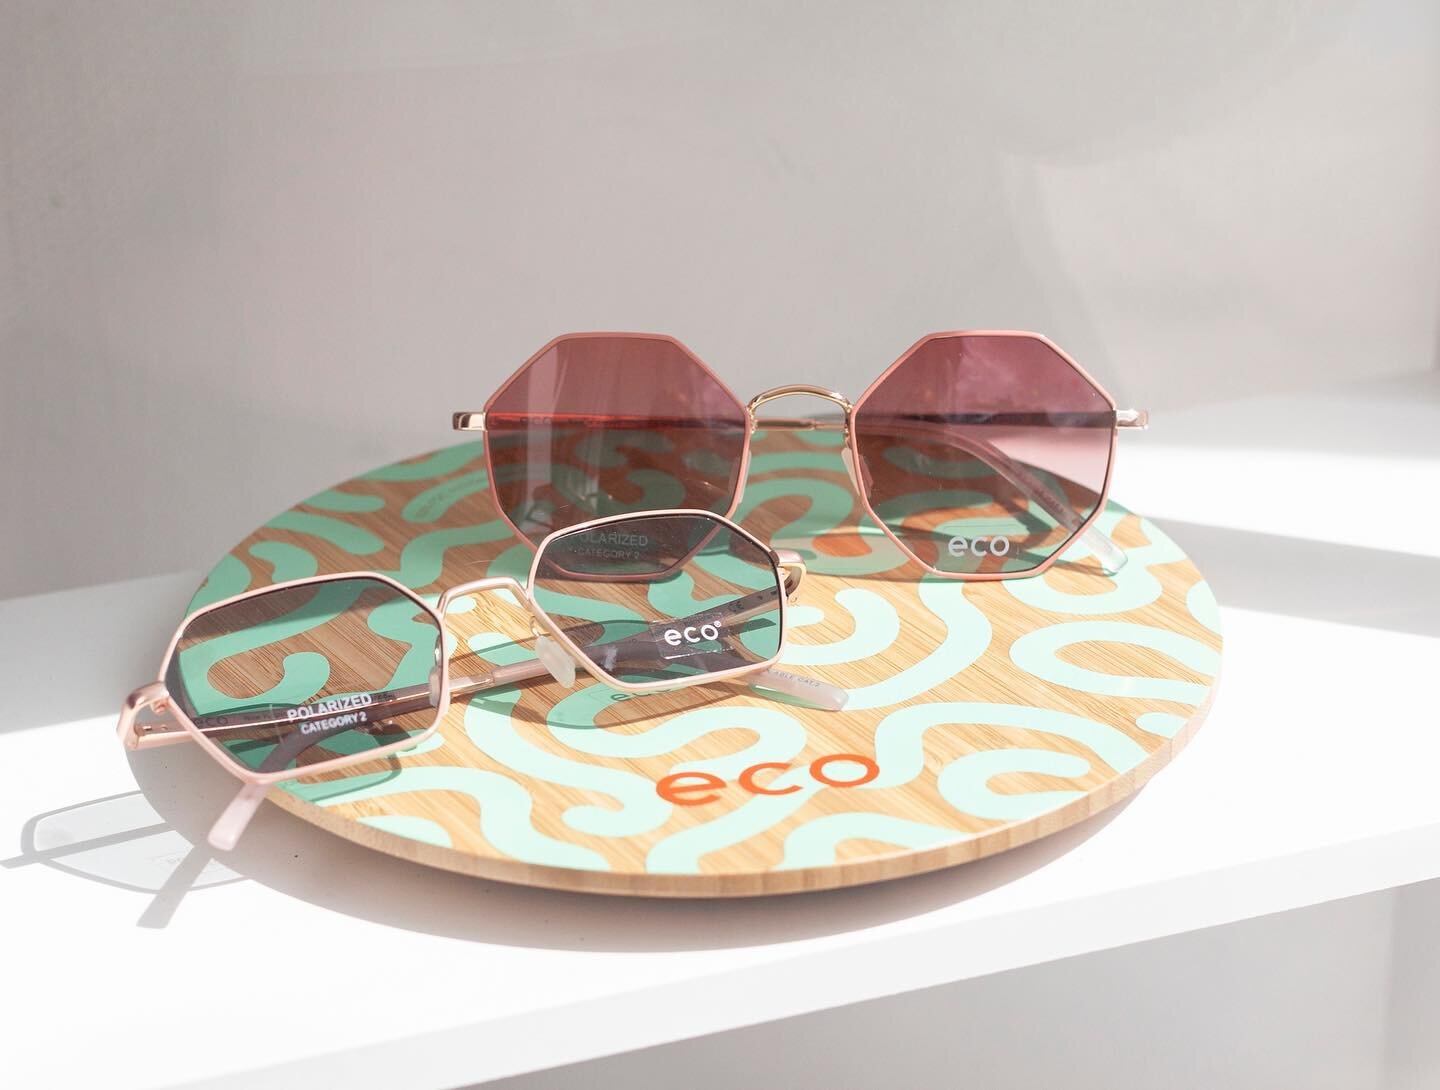 Pink to make the boys wink 😉
⠀⠀⠀⠀⠀⠀⠀⠀⠀
New in @ecoeyewear Sunglasses 〰️ Fashion-forward. Sustainable. Daring. We could keep going on, but you get the point.
⠀⠀⠀⠀⠀⠀⠀⠀⠀
Macau in Rose Gold and Niseko in Rose Gold both available at AMO for &pound;75 🌸 